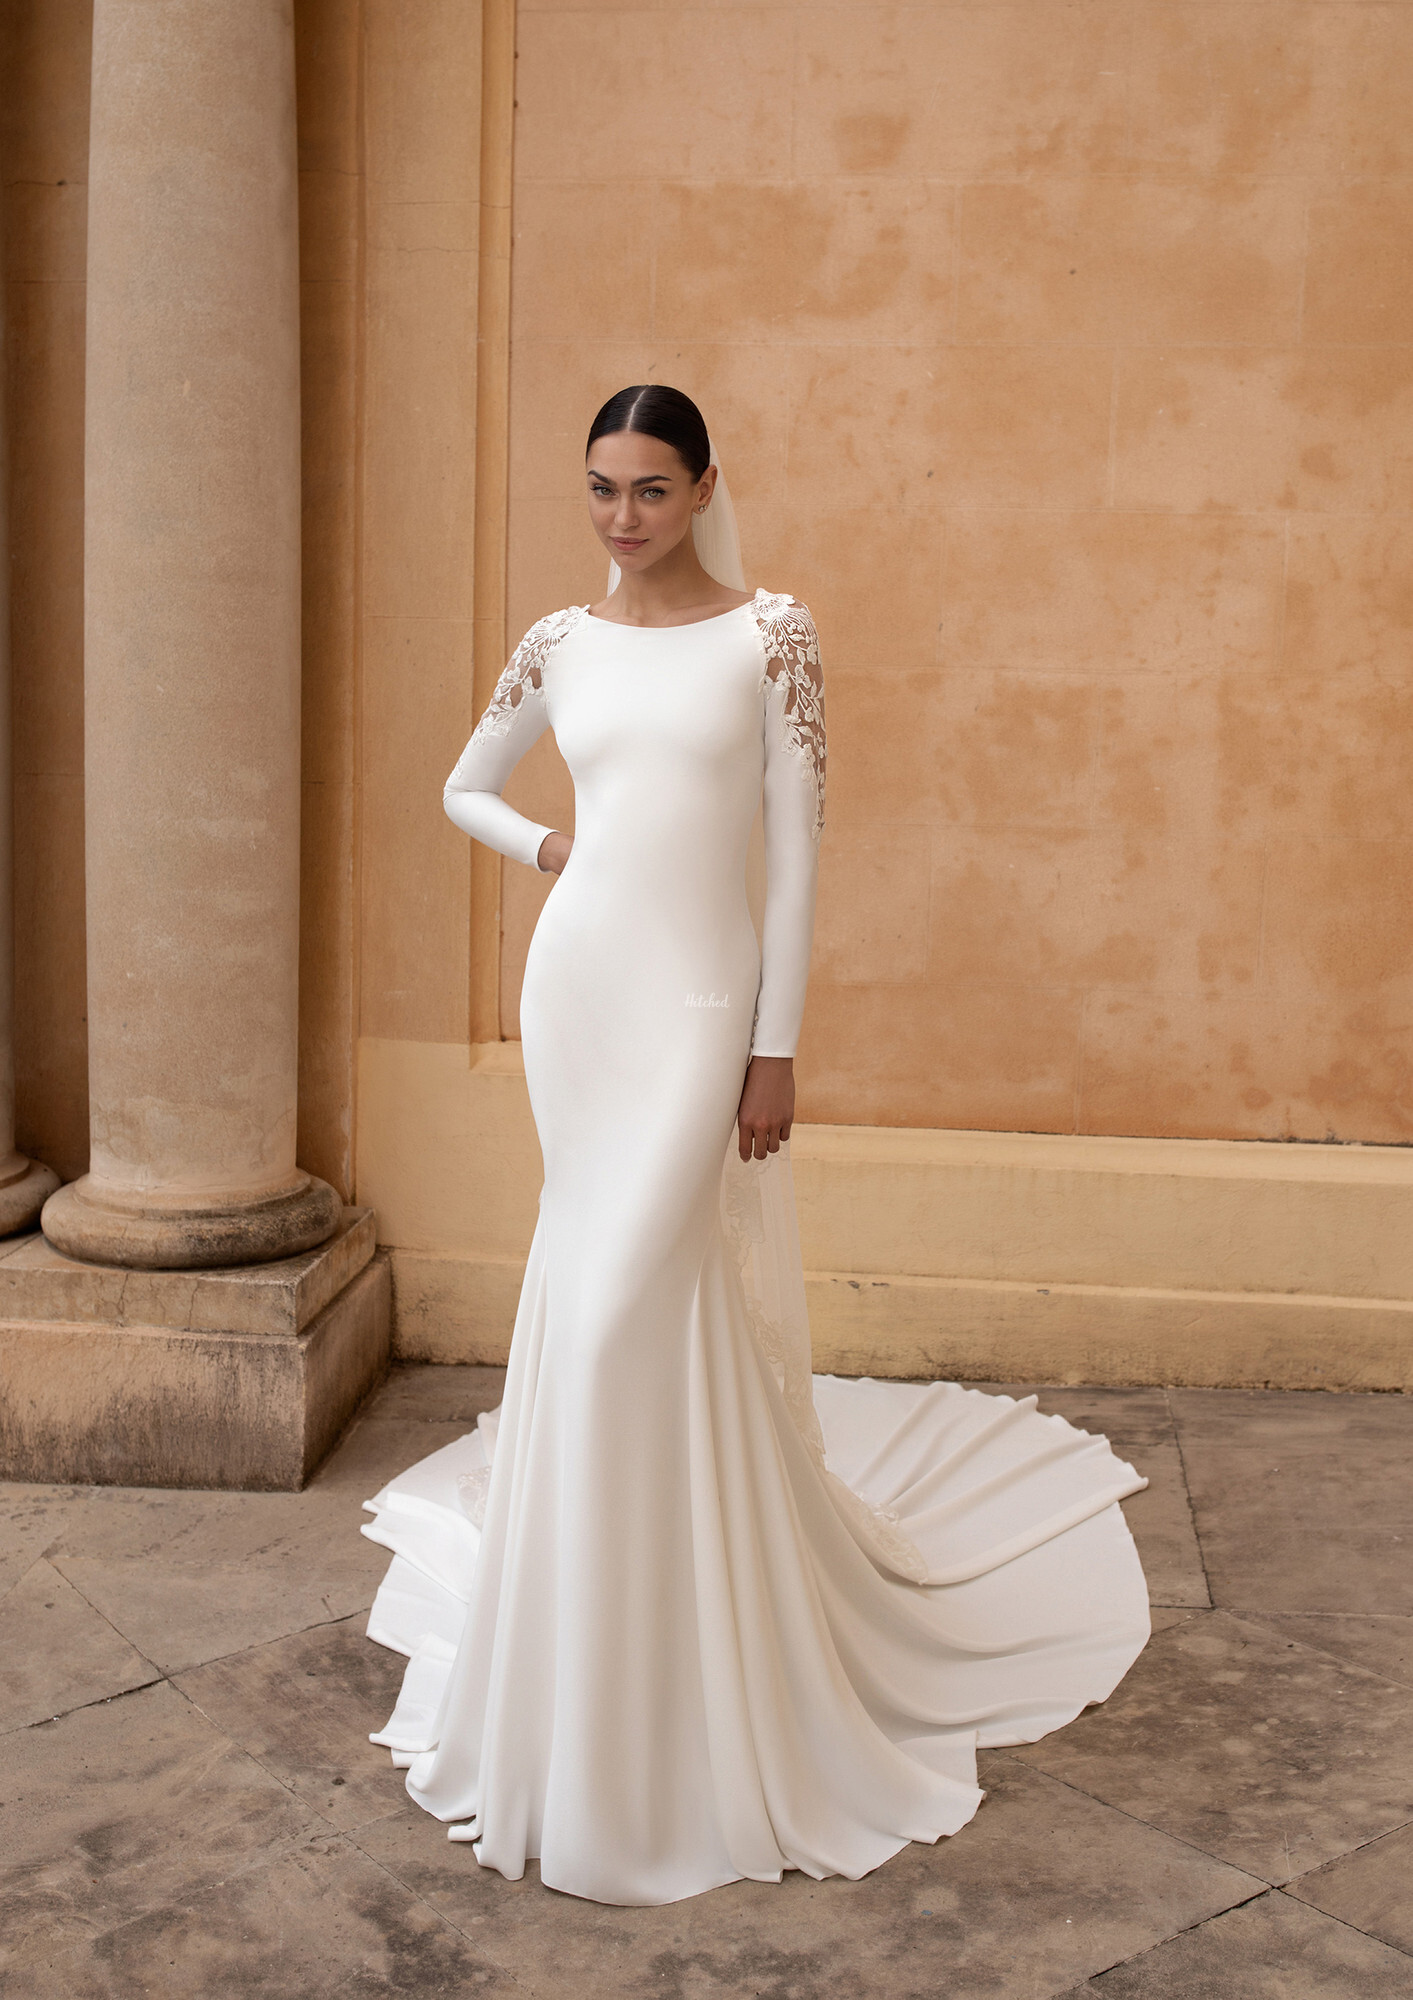 FROSTIA Wedding Dress from Pronovias - hitched.co.uk